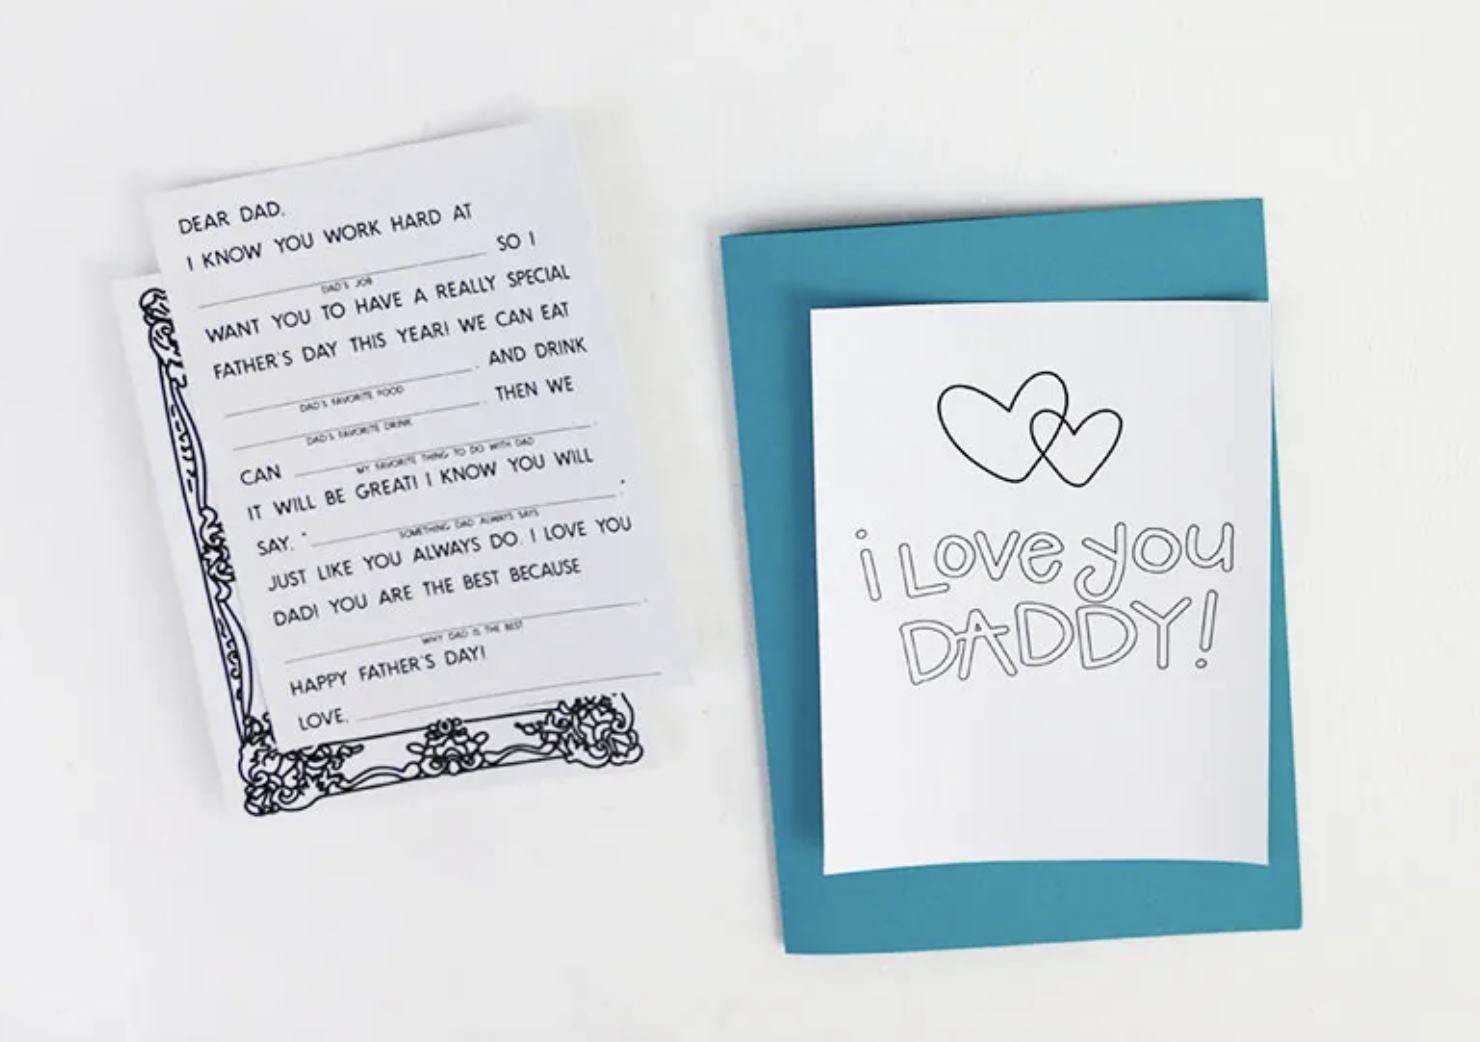 16 Funny gifts for dad: Presents to make your dad smile